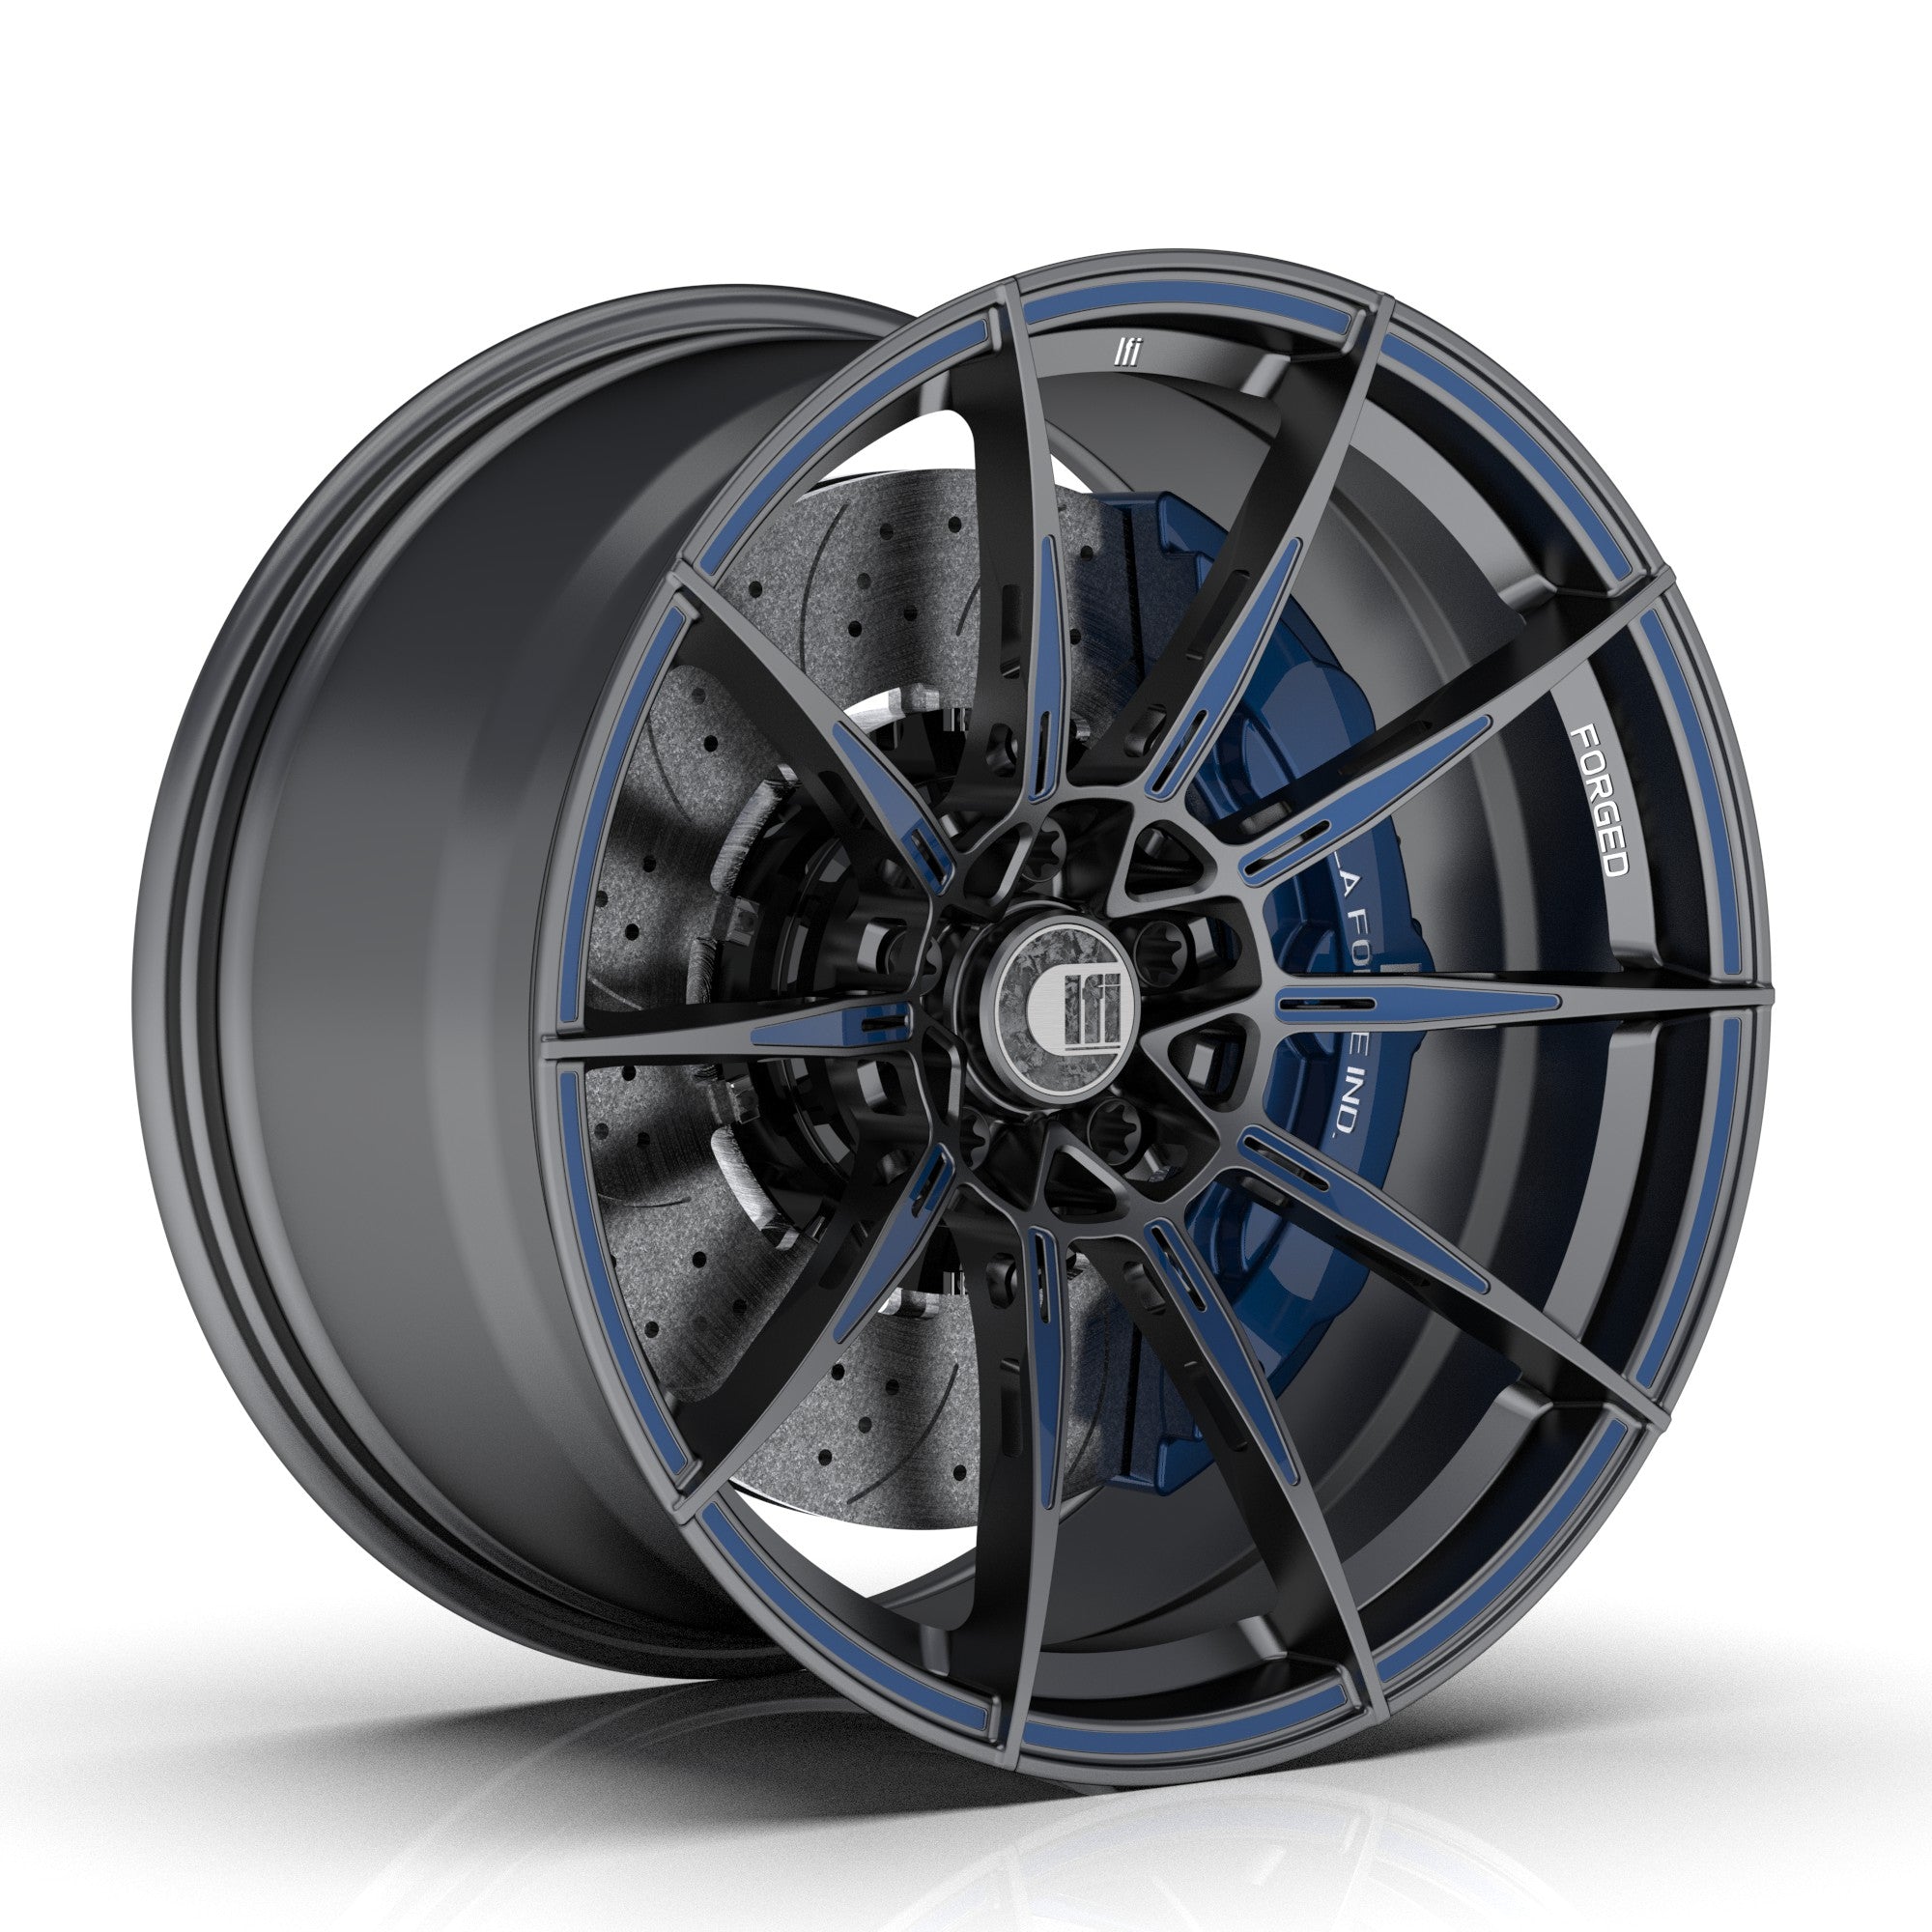 LFI REX-05 Founder's Edition Racing Forged Wheel